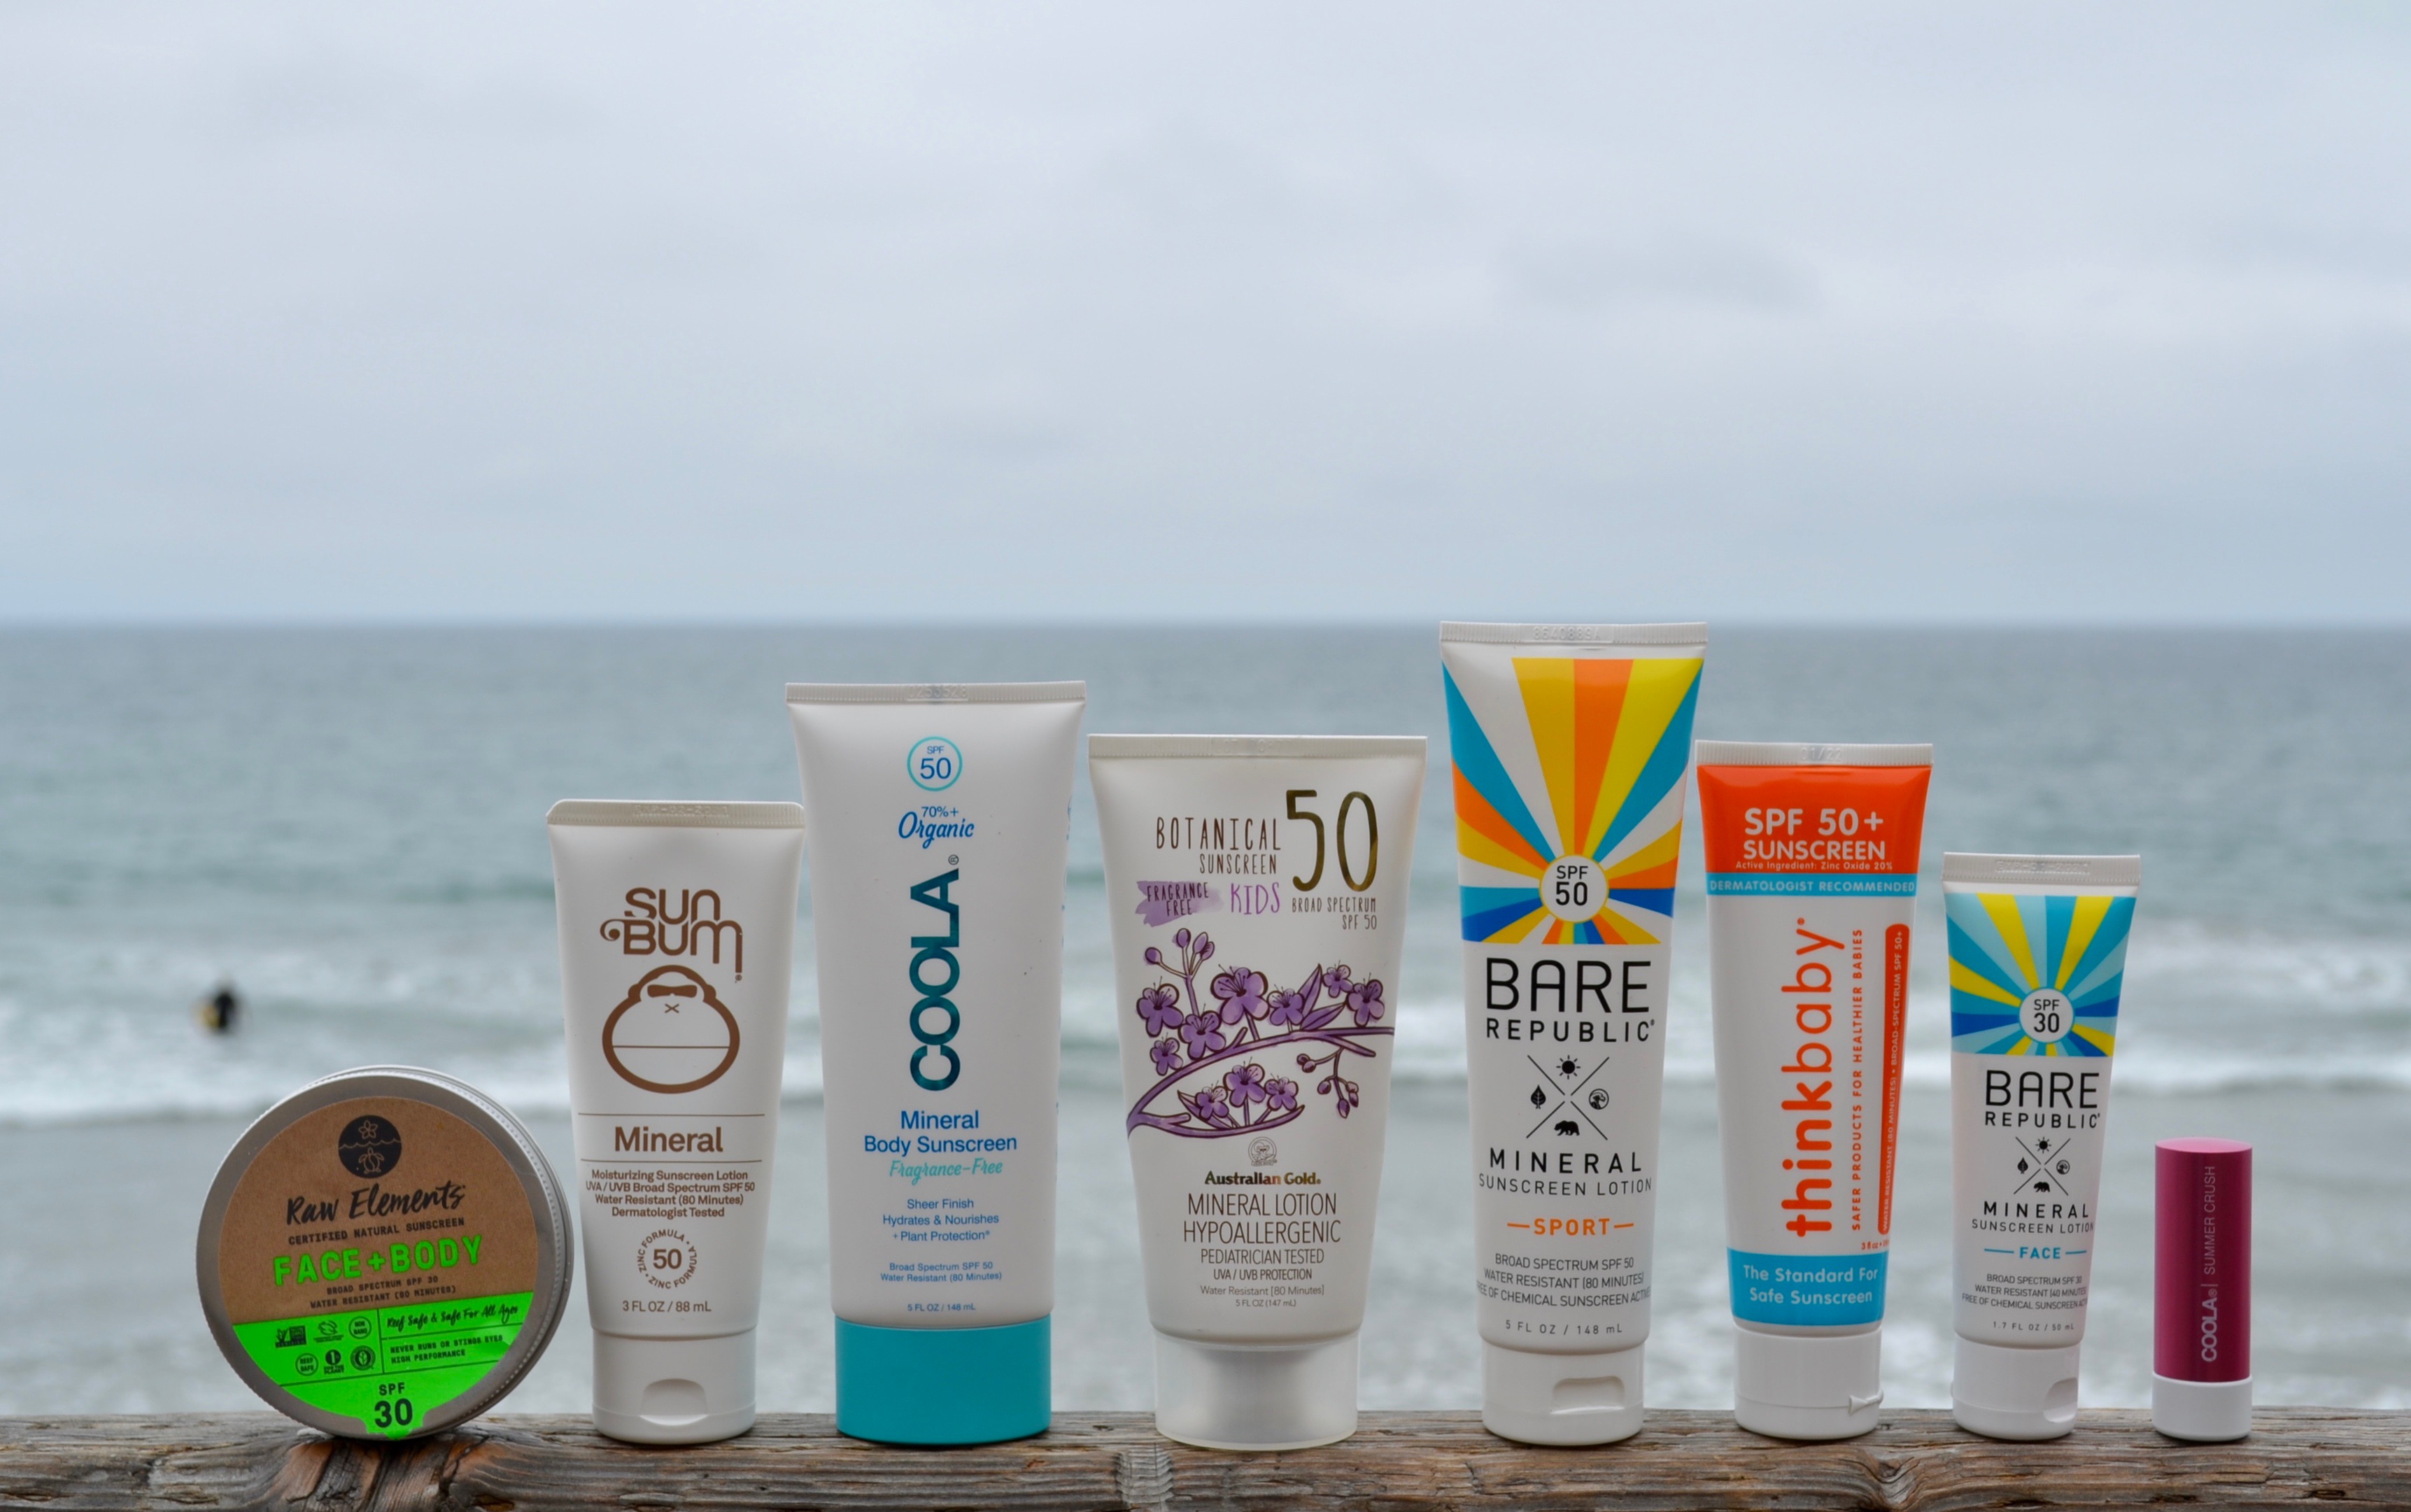 Best Reef Friendly and Cruelty Free Sunscreens - image